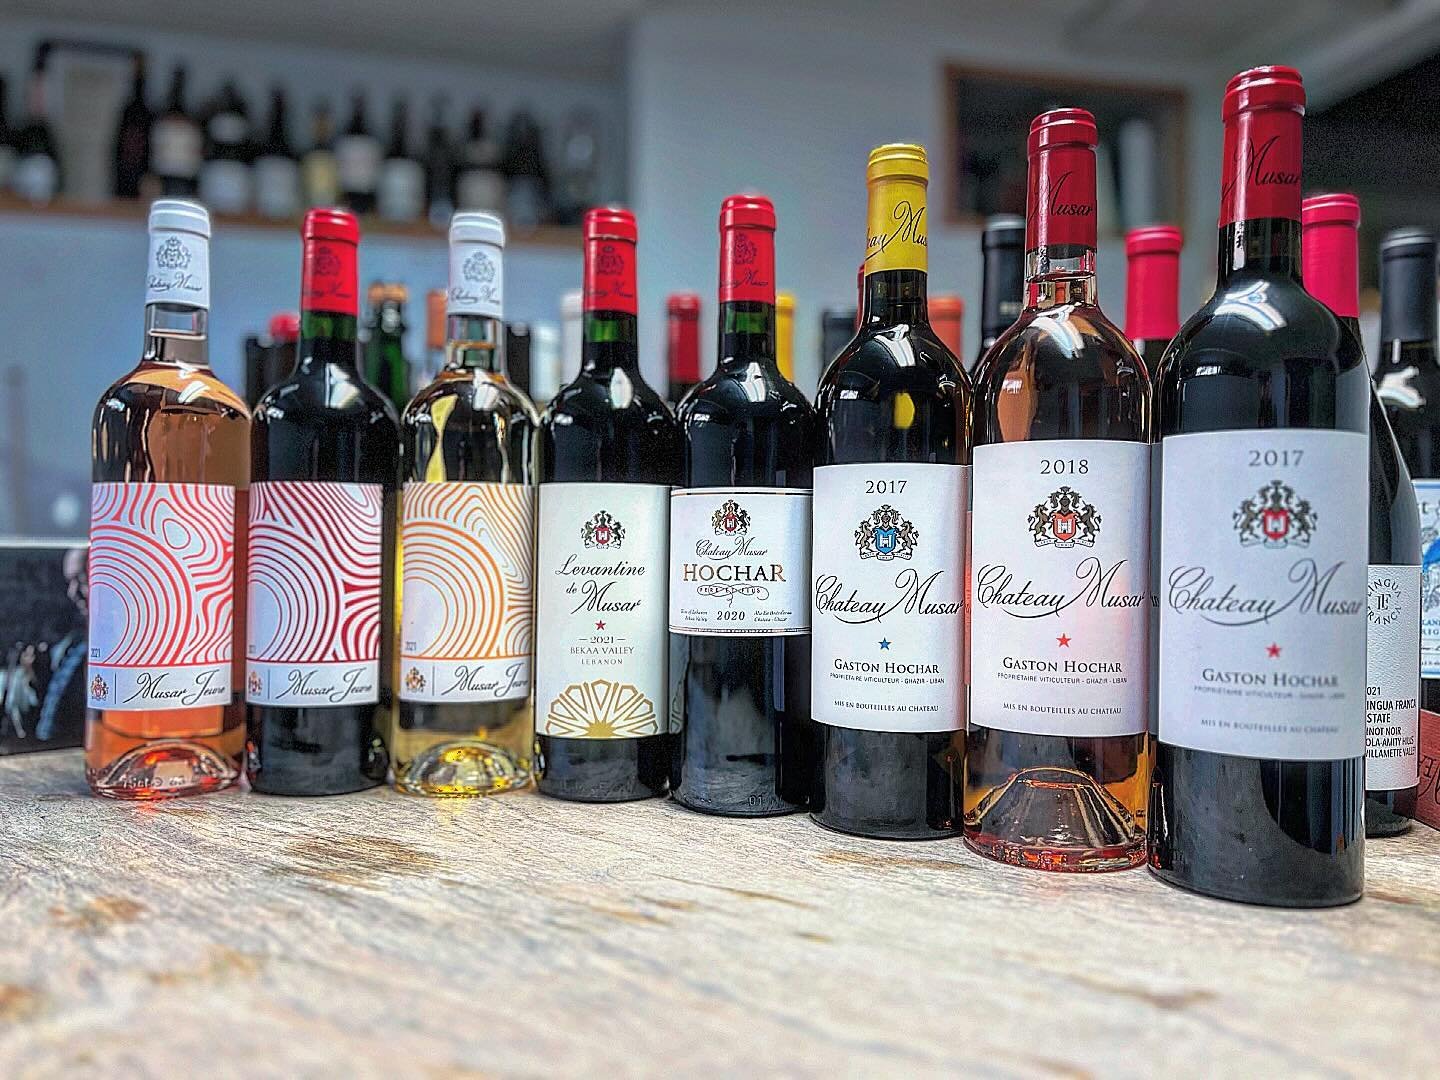 🇱🇧 &ldquo;For me, my religion is wine. Because wine is a reflection of nature, and a gift of God.&ldquo; - Serge Hochar of @chateaumusar 🇱🇧 
.
It&rsquo;s my honor to announce that this year, due to the generosity of @marchochar and @camera.kat of